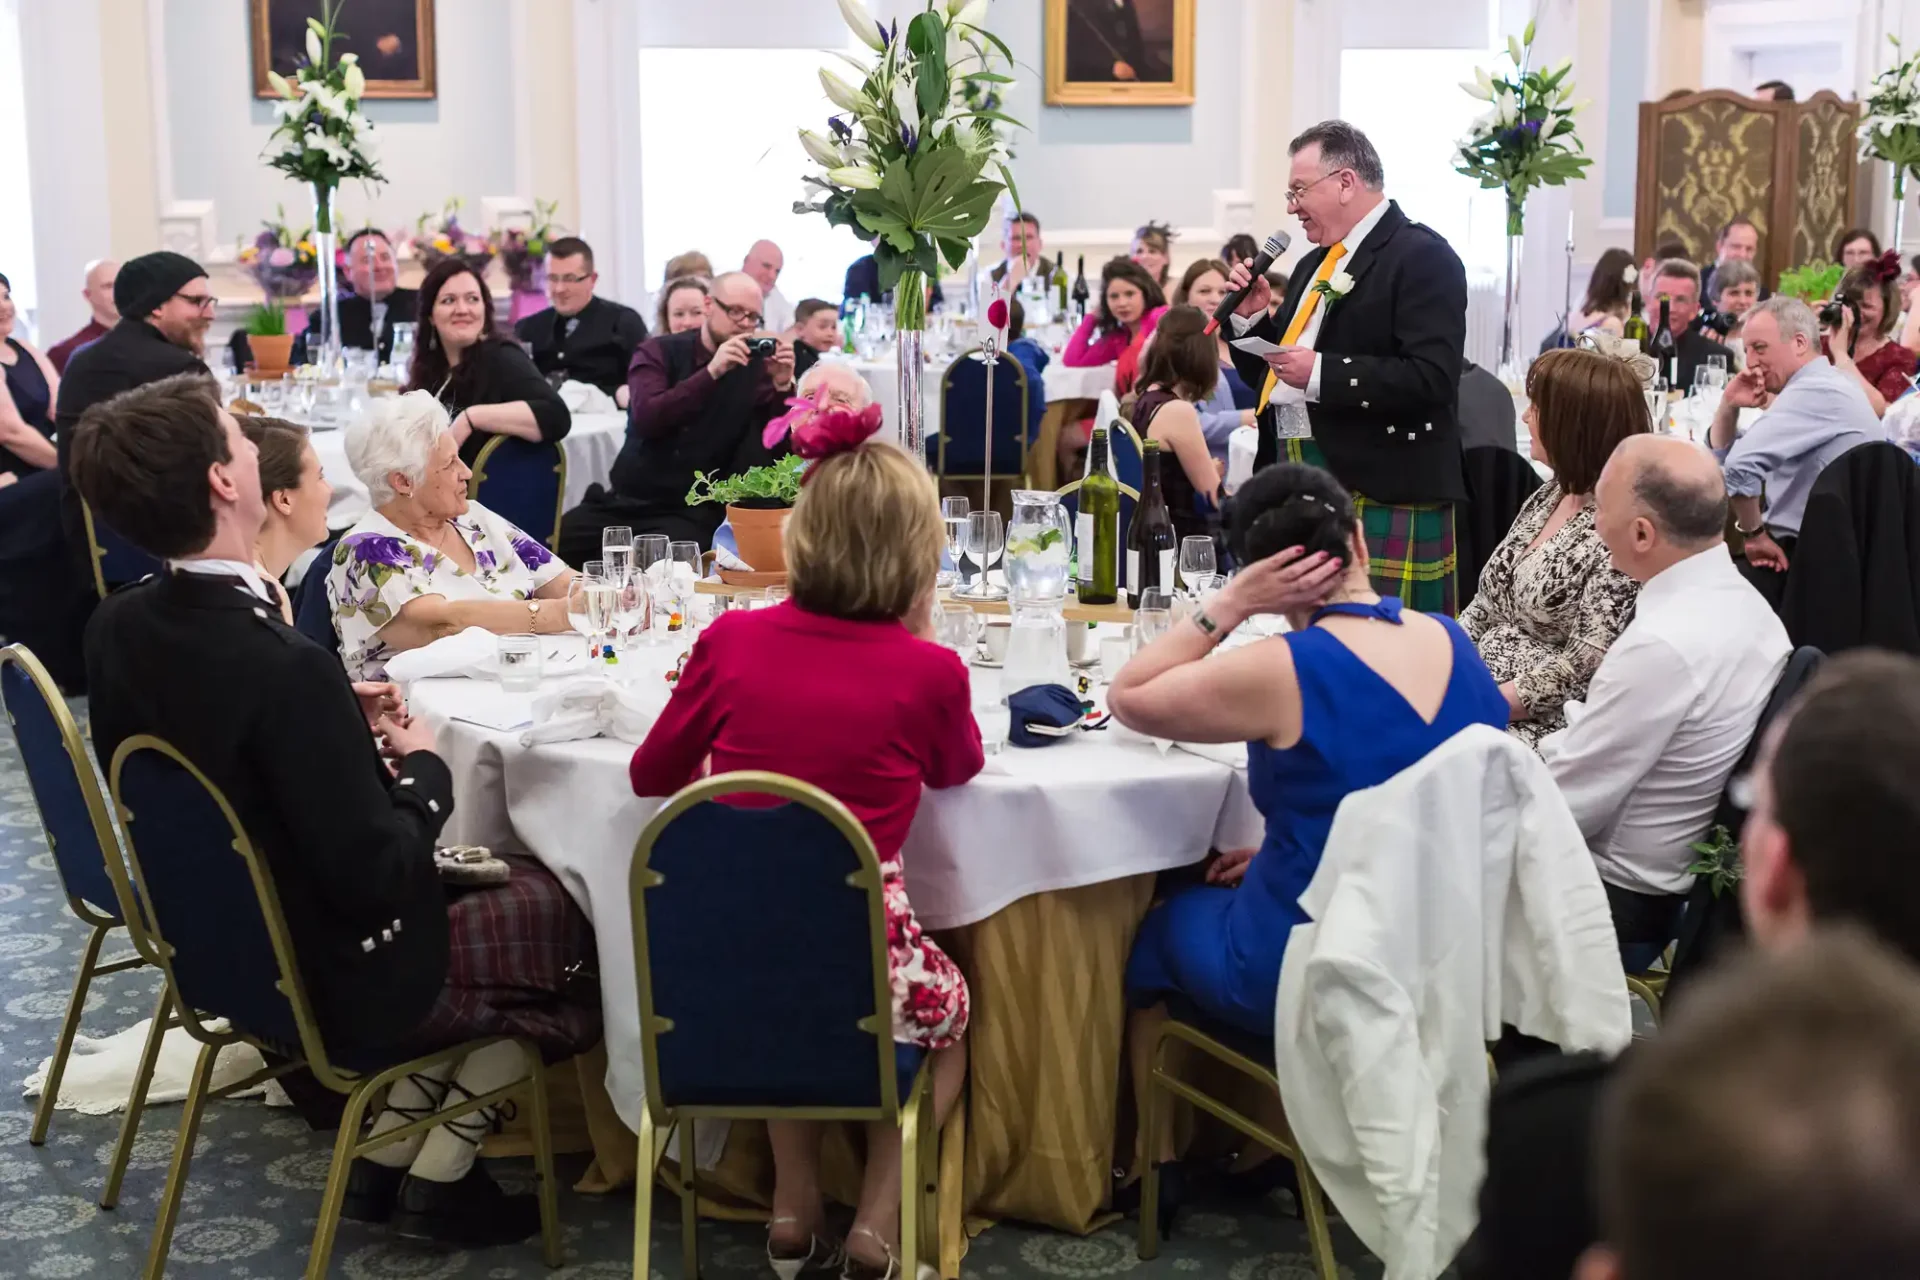 Man in kilt speaking to guests at a formal dinner event with tables set elegantly, guests engaged and dining in a brightly lit room.